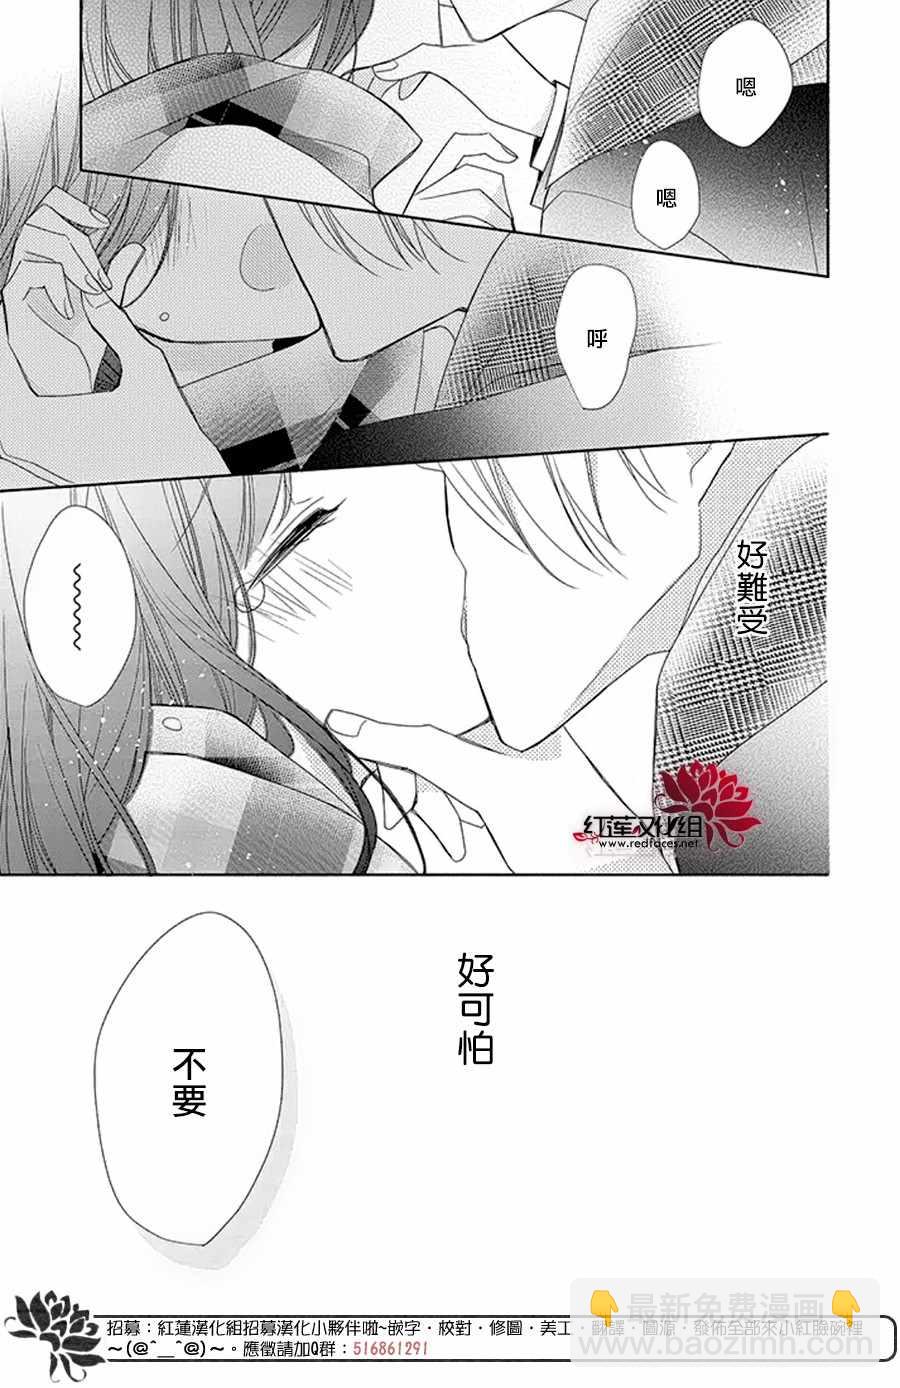 If given a second chance - 18話 - 2